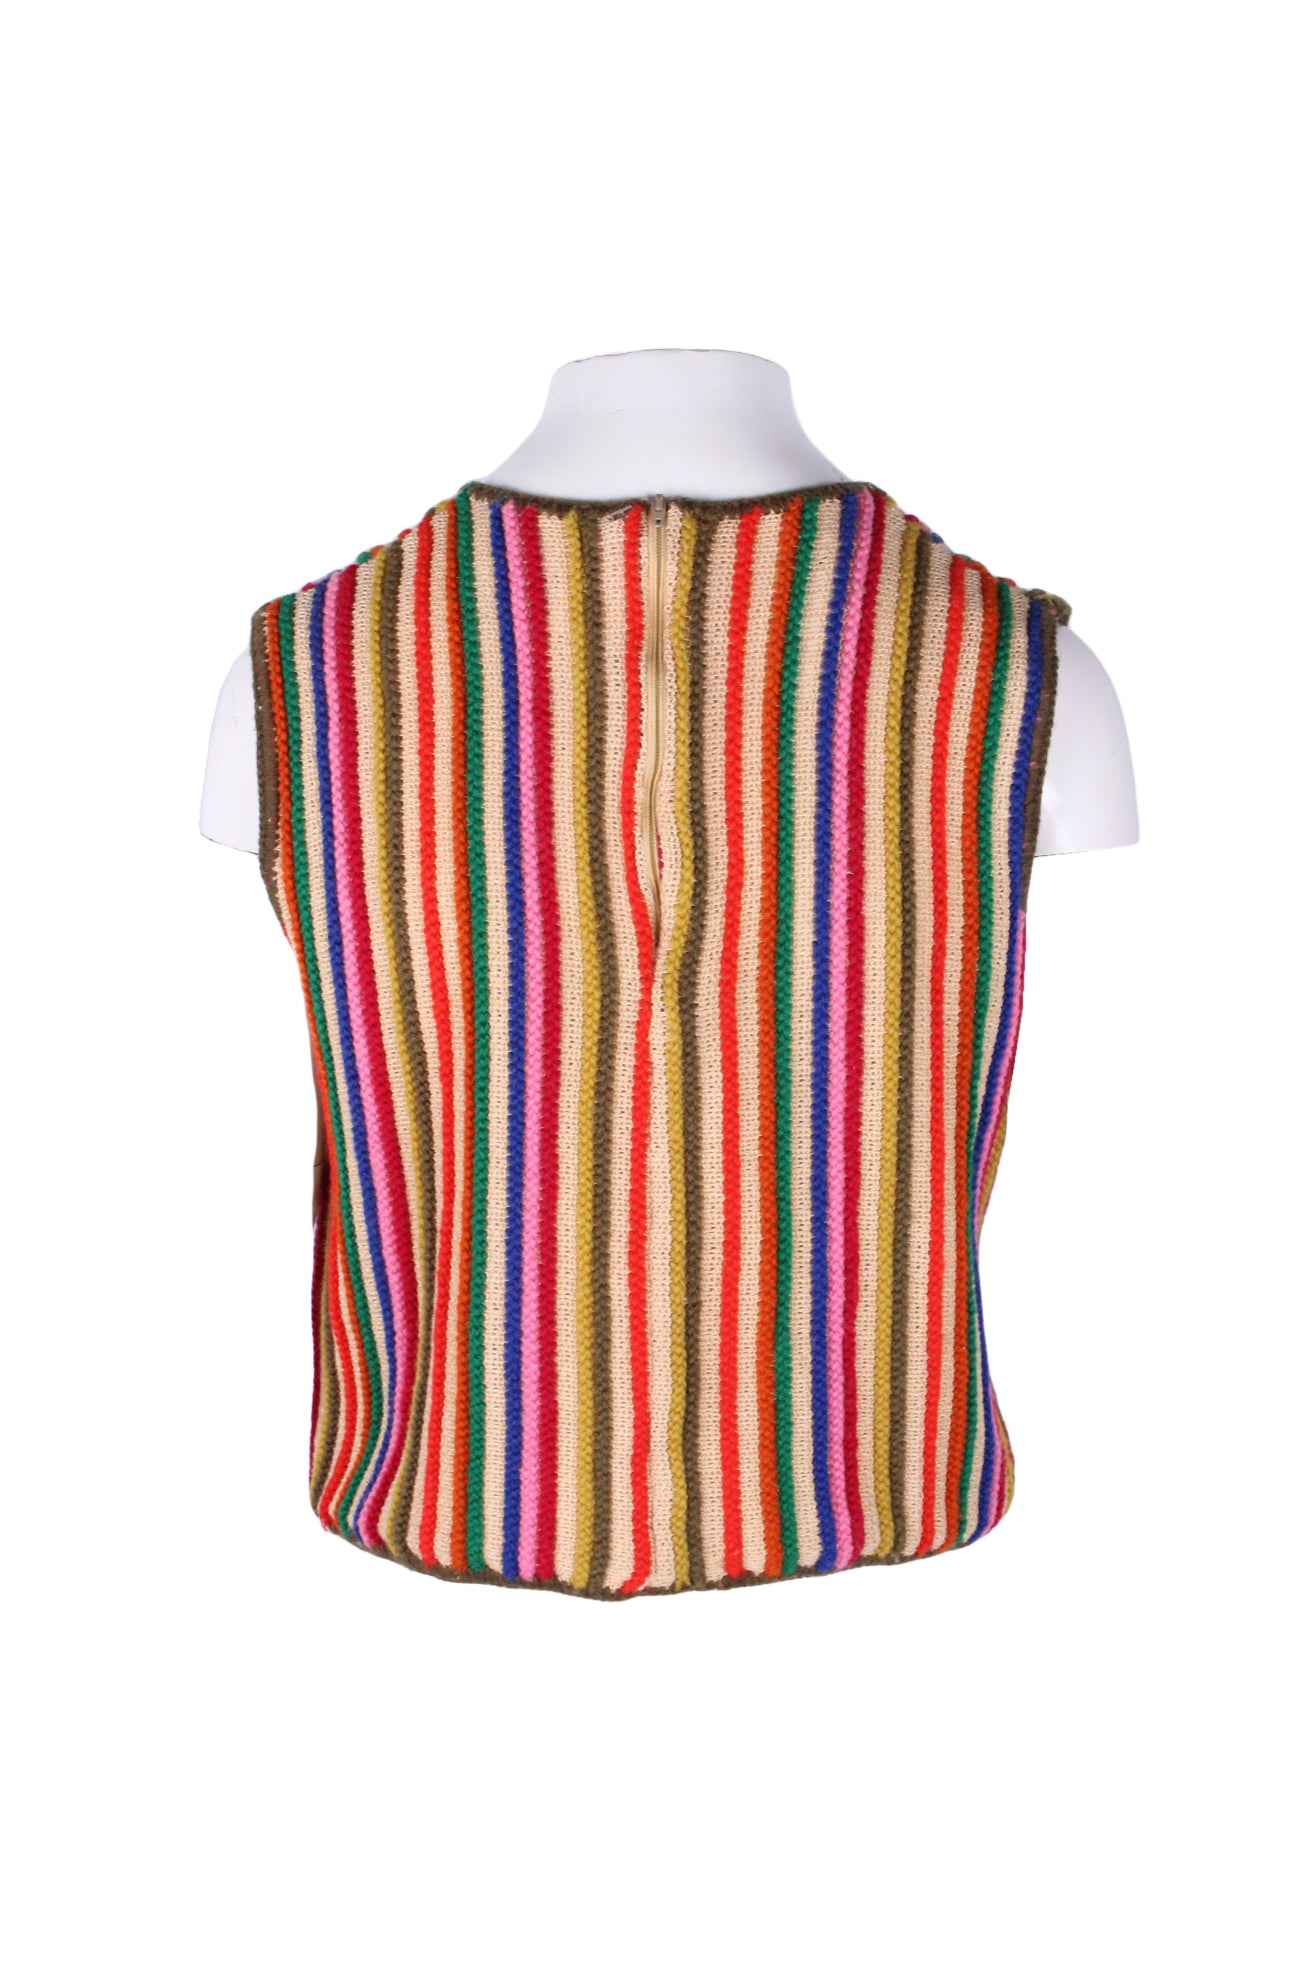 back of multicolor knit top.  